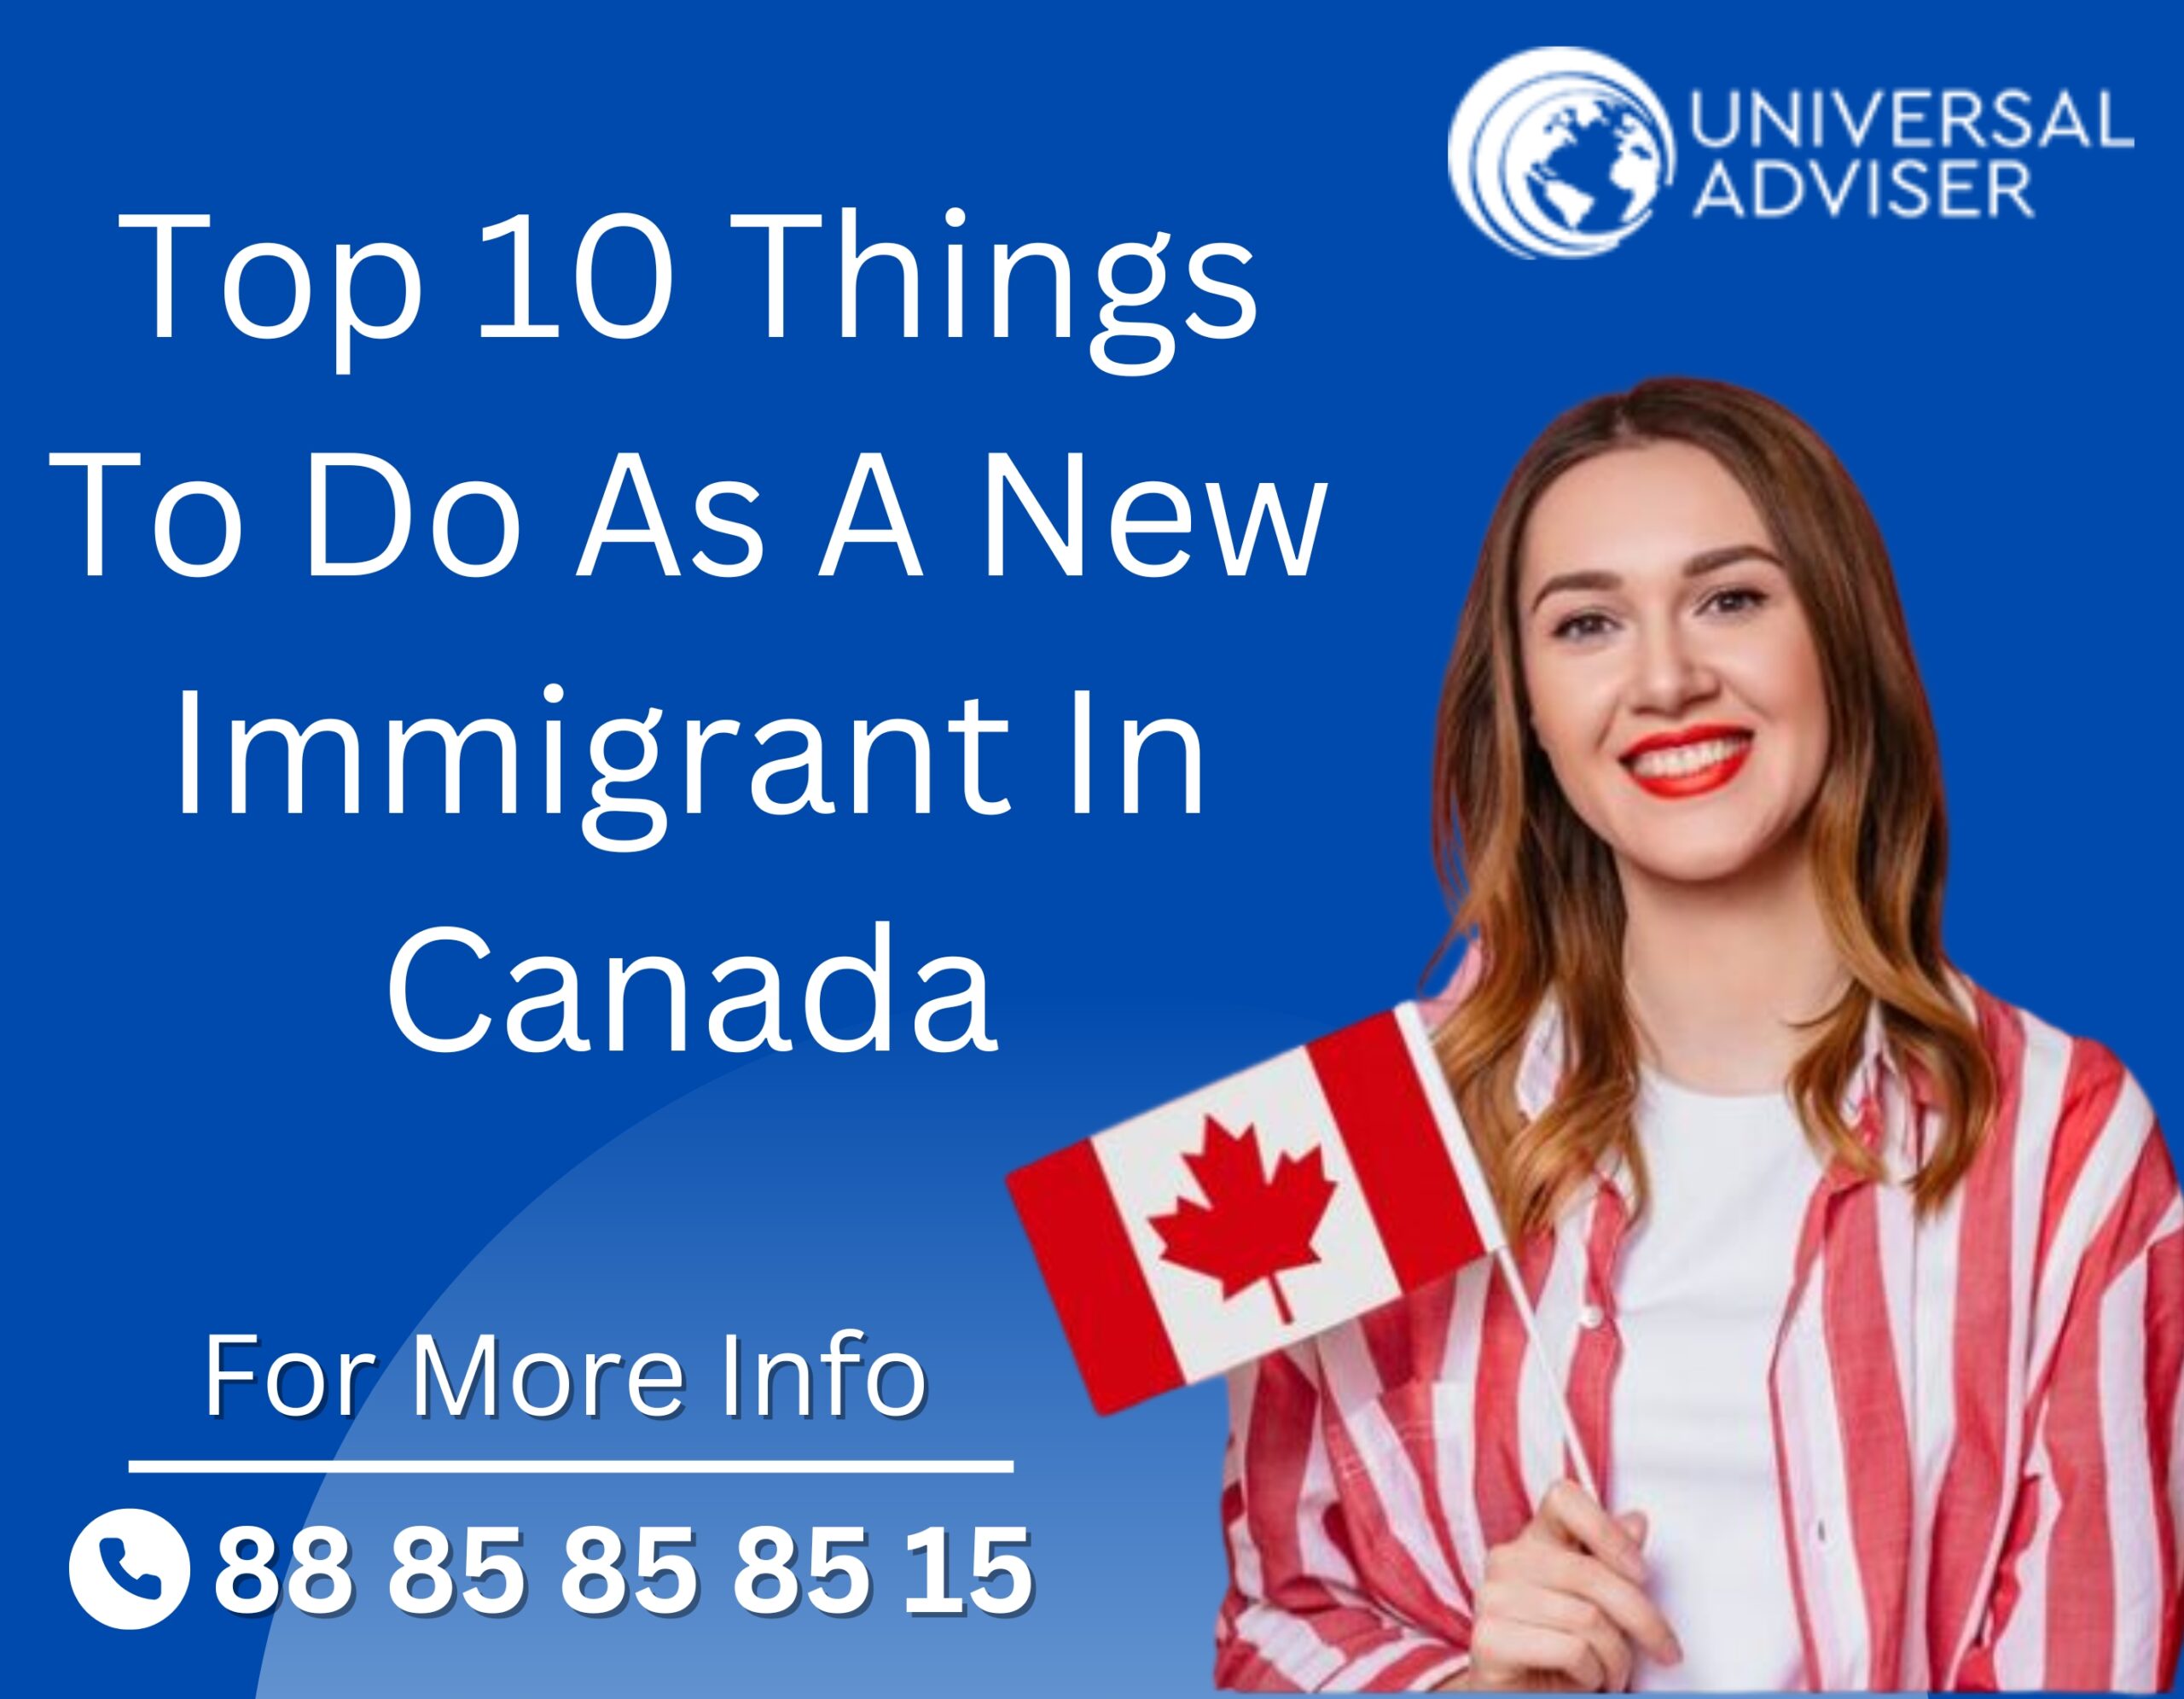 Top 10 Things to Do as a Newcomer to Canada